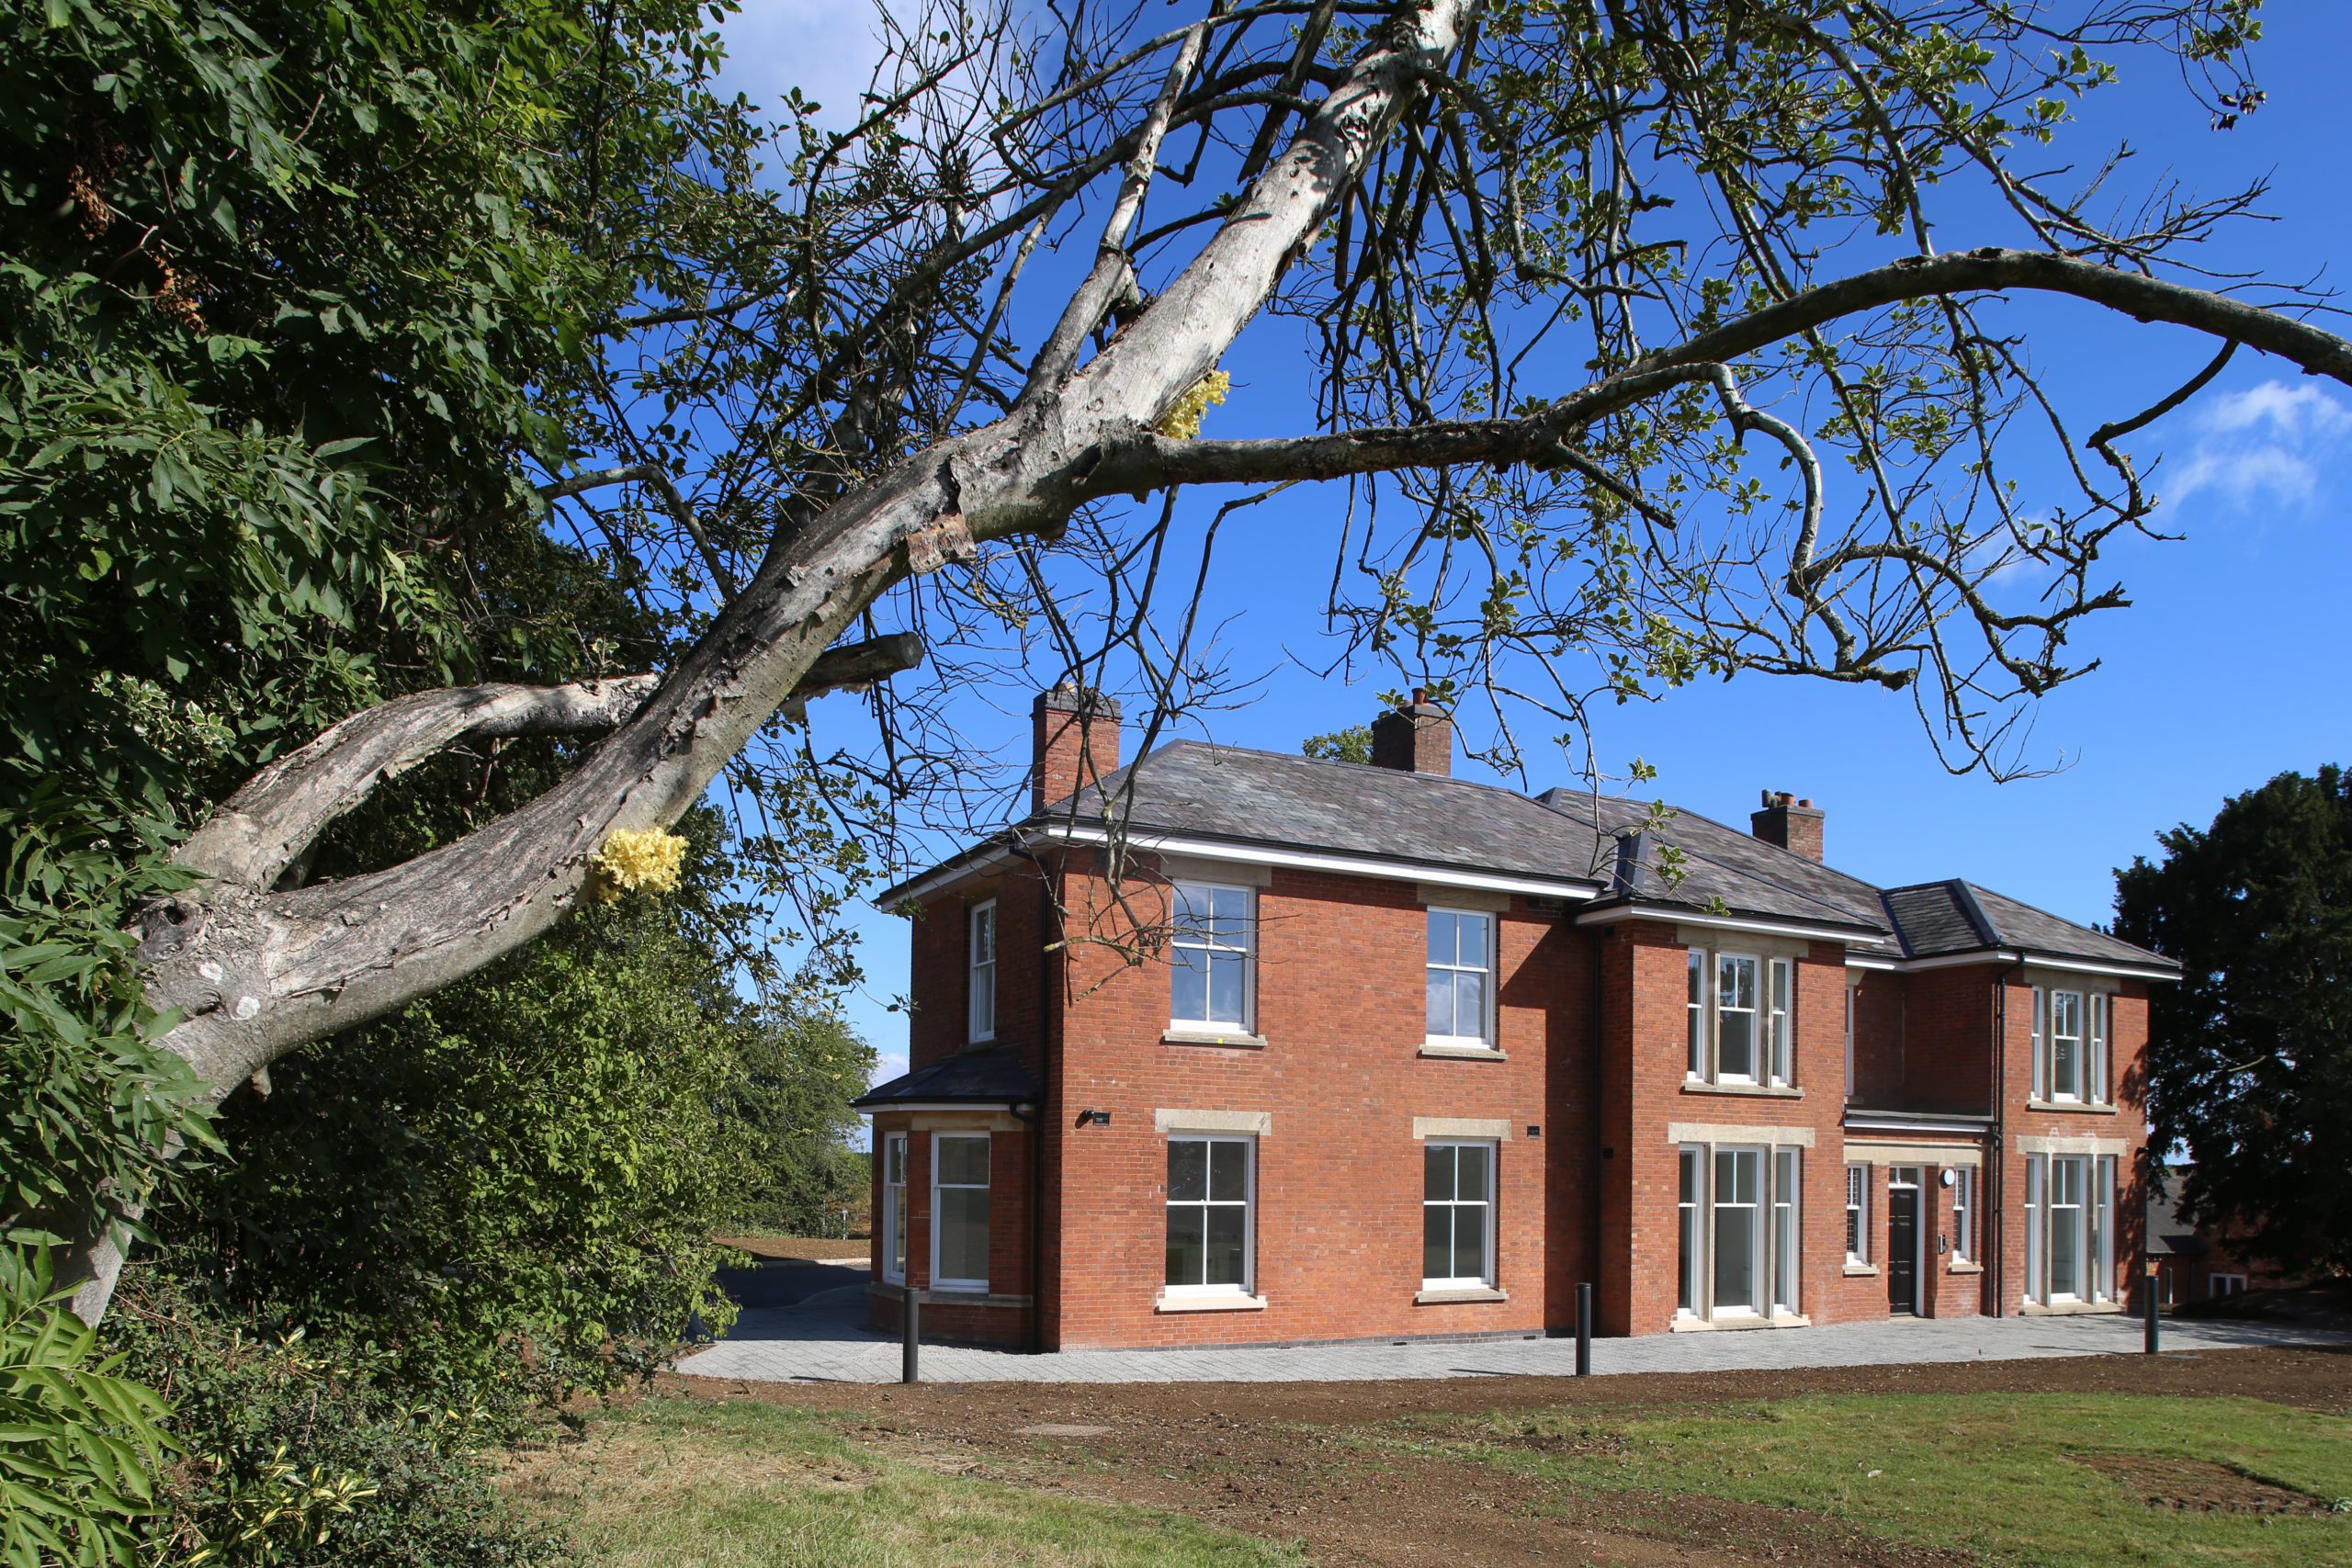 The Centre for Logistics, Education and Research, a red-brick building in a field surrounded by trees.